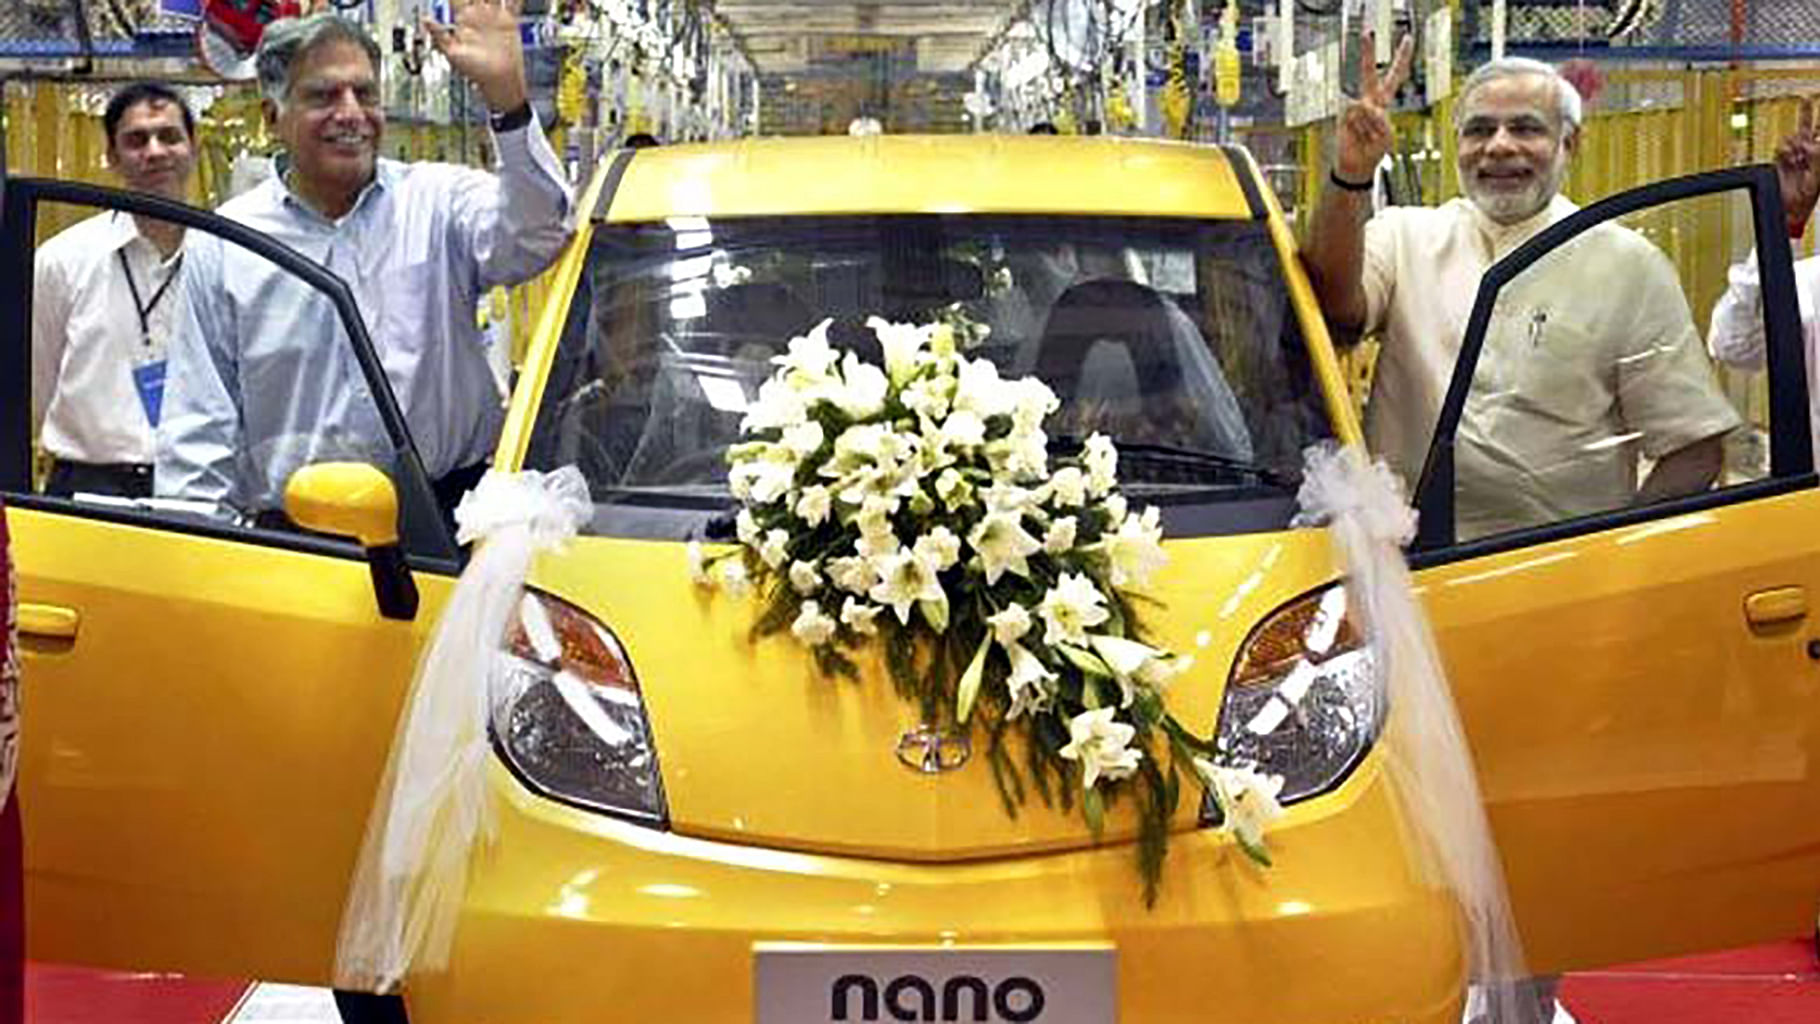 Tata Group Chairman Ratan Tata, (left) and the then Gujarat
Chief Minister Narendra Modi rolling out the first Tata Nano in Sanand, near
Ahmedabad. (Photo: AP)